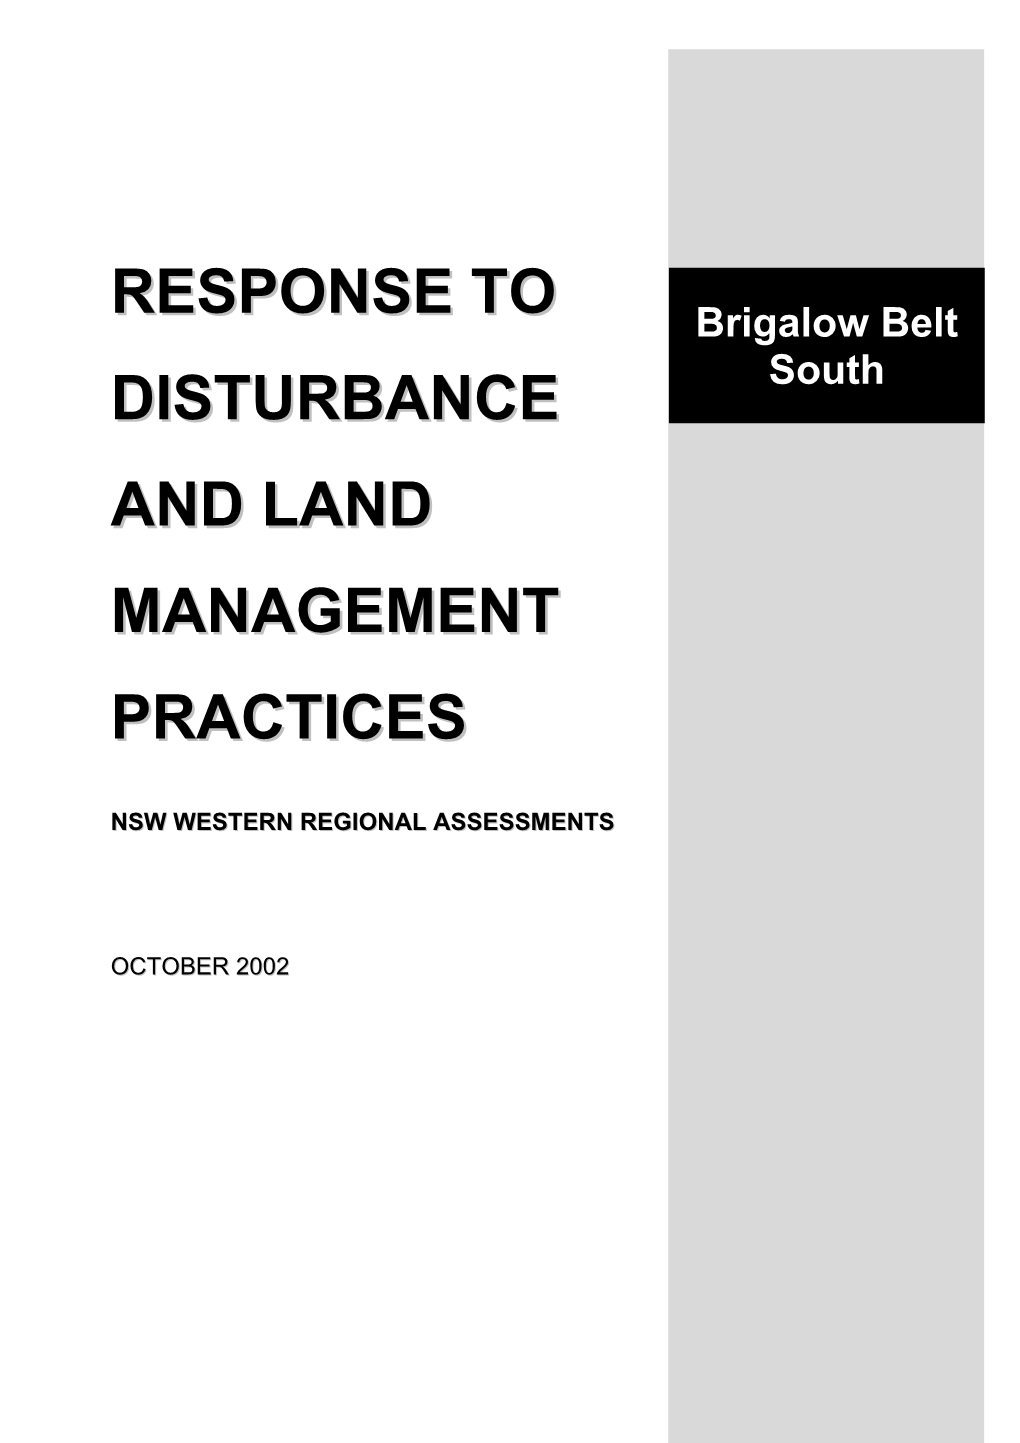 Response to Disturbance and Land Management Practices